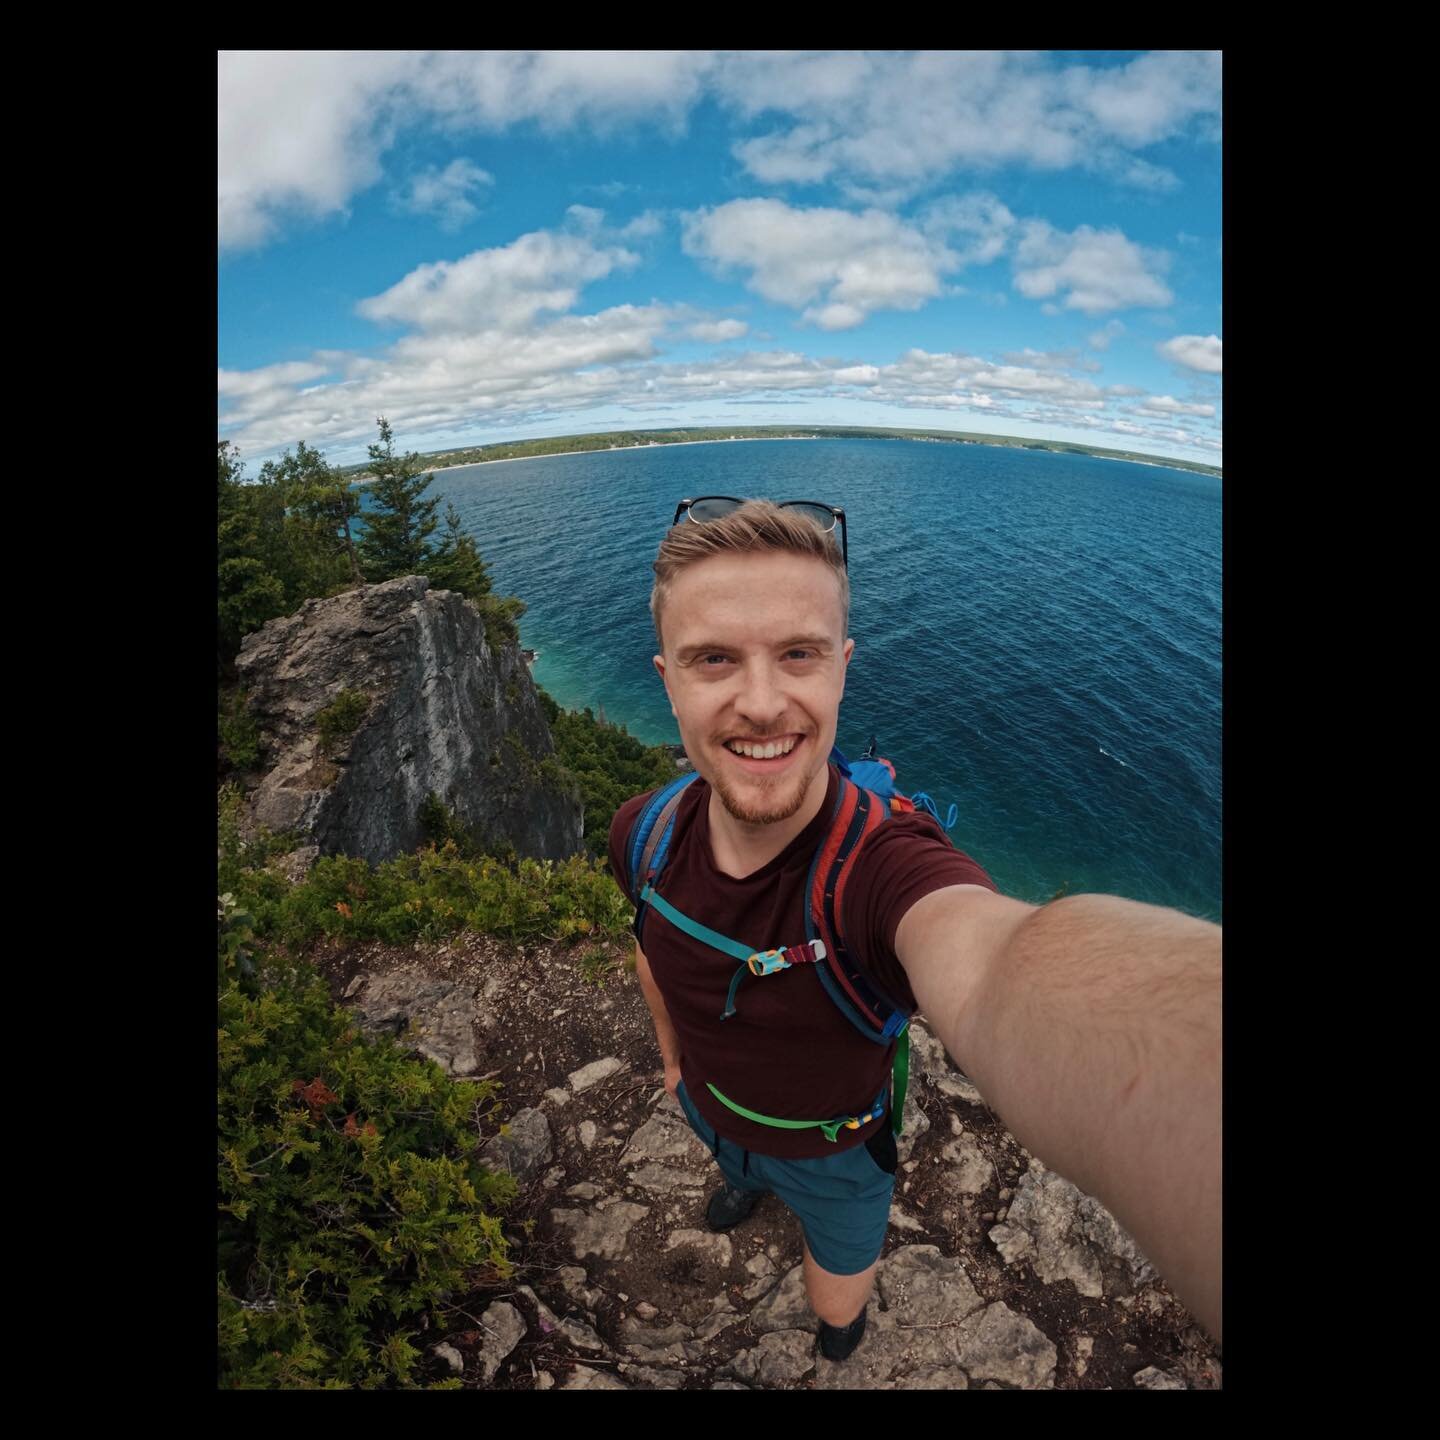 ⁣
Views from the Bruce 🥾🏔⁣
⁣
Took what short time I had away from weddings this season to hit up some of our favourite hiking spots in Bruce Peninsula National Park. Plus one of the only places you can paddle out to a shipwreck from 1885!
⁣
All sho